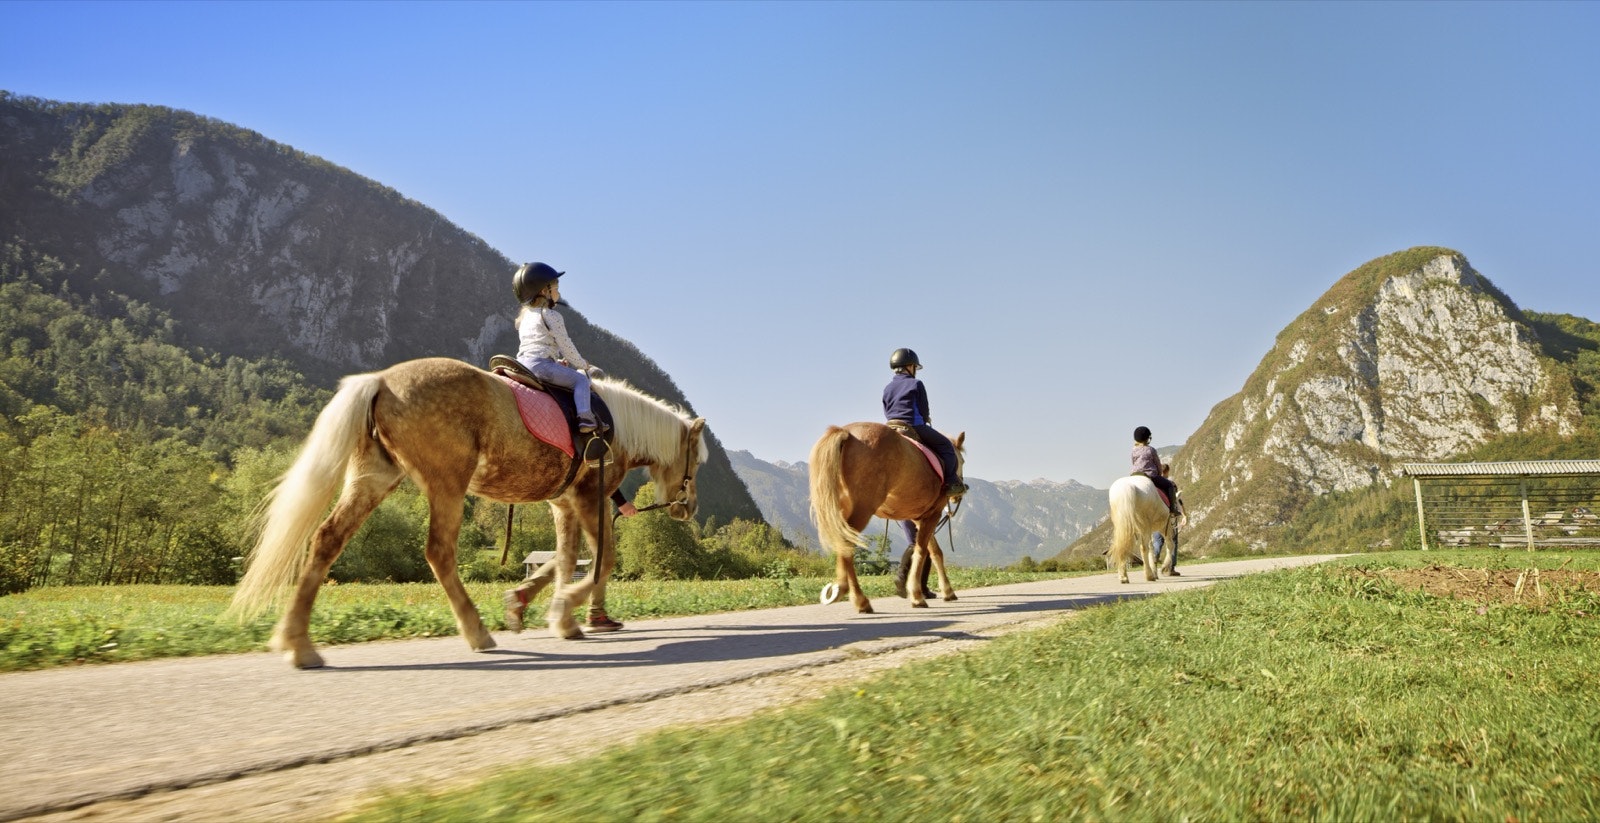 Three horses with riders of different ages walk in a line toward some hills